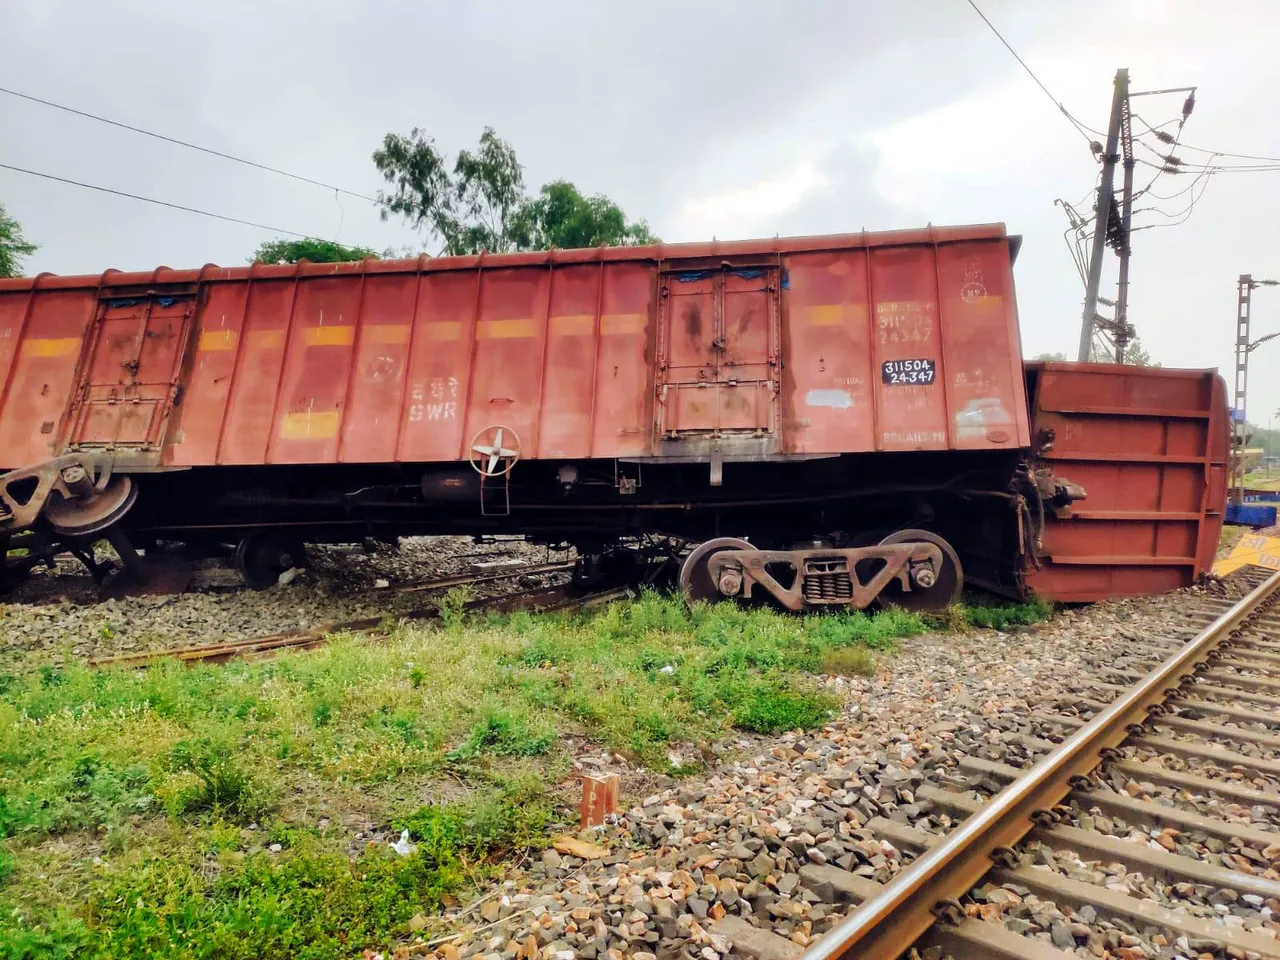 Several boggies derailed after two goods trains collided with each other near West Bengal's Bankura, in the wee hours of Sunday